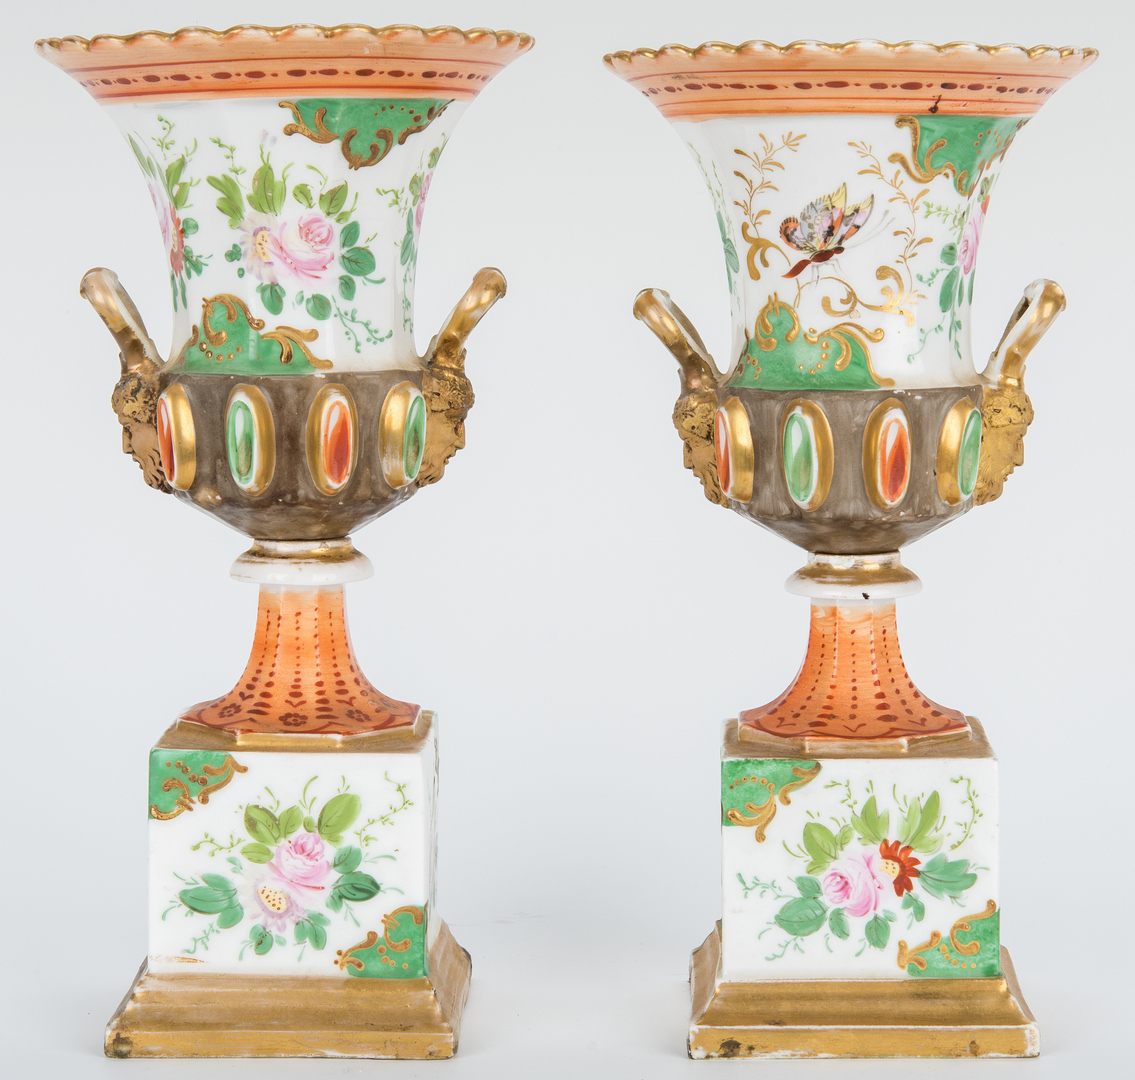 Lot 253: Pr. French Porcelain Urns w/ Mask Handles & English Ironstone Plates, 6 items